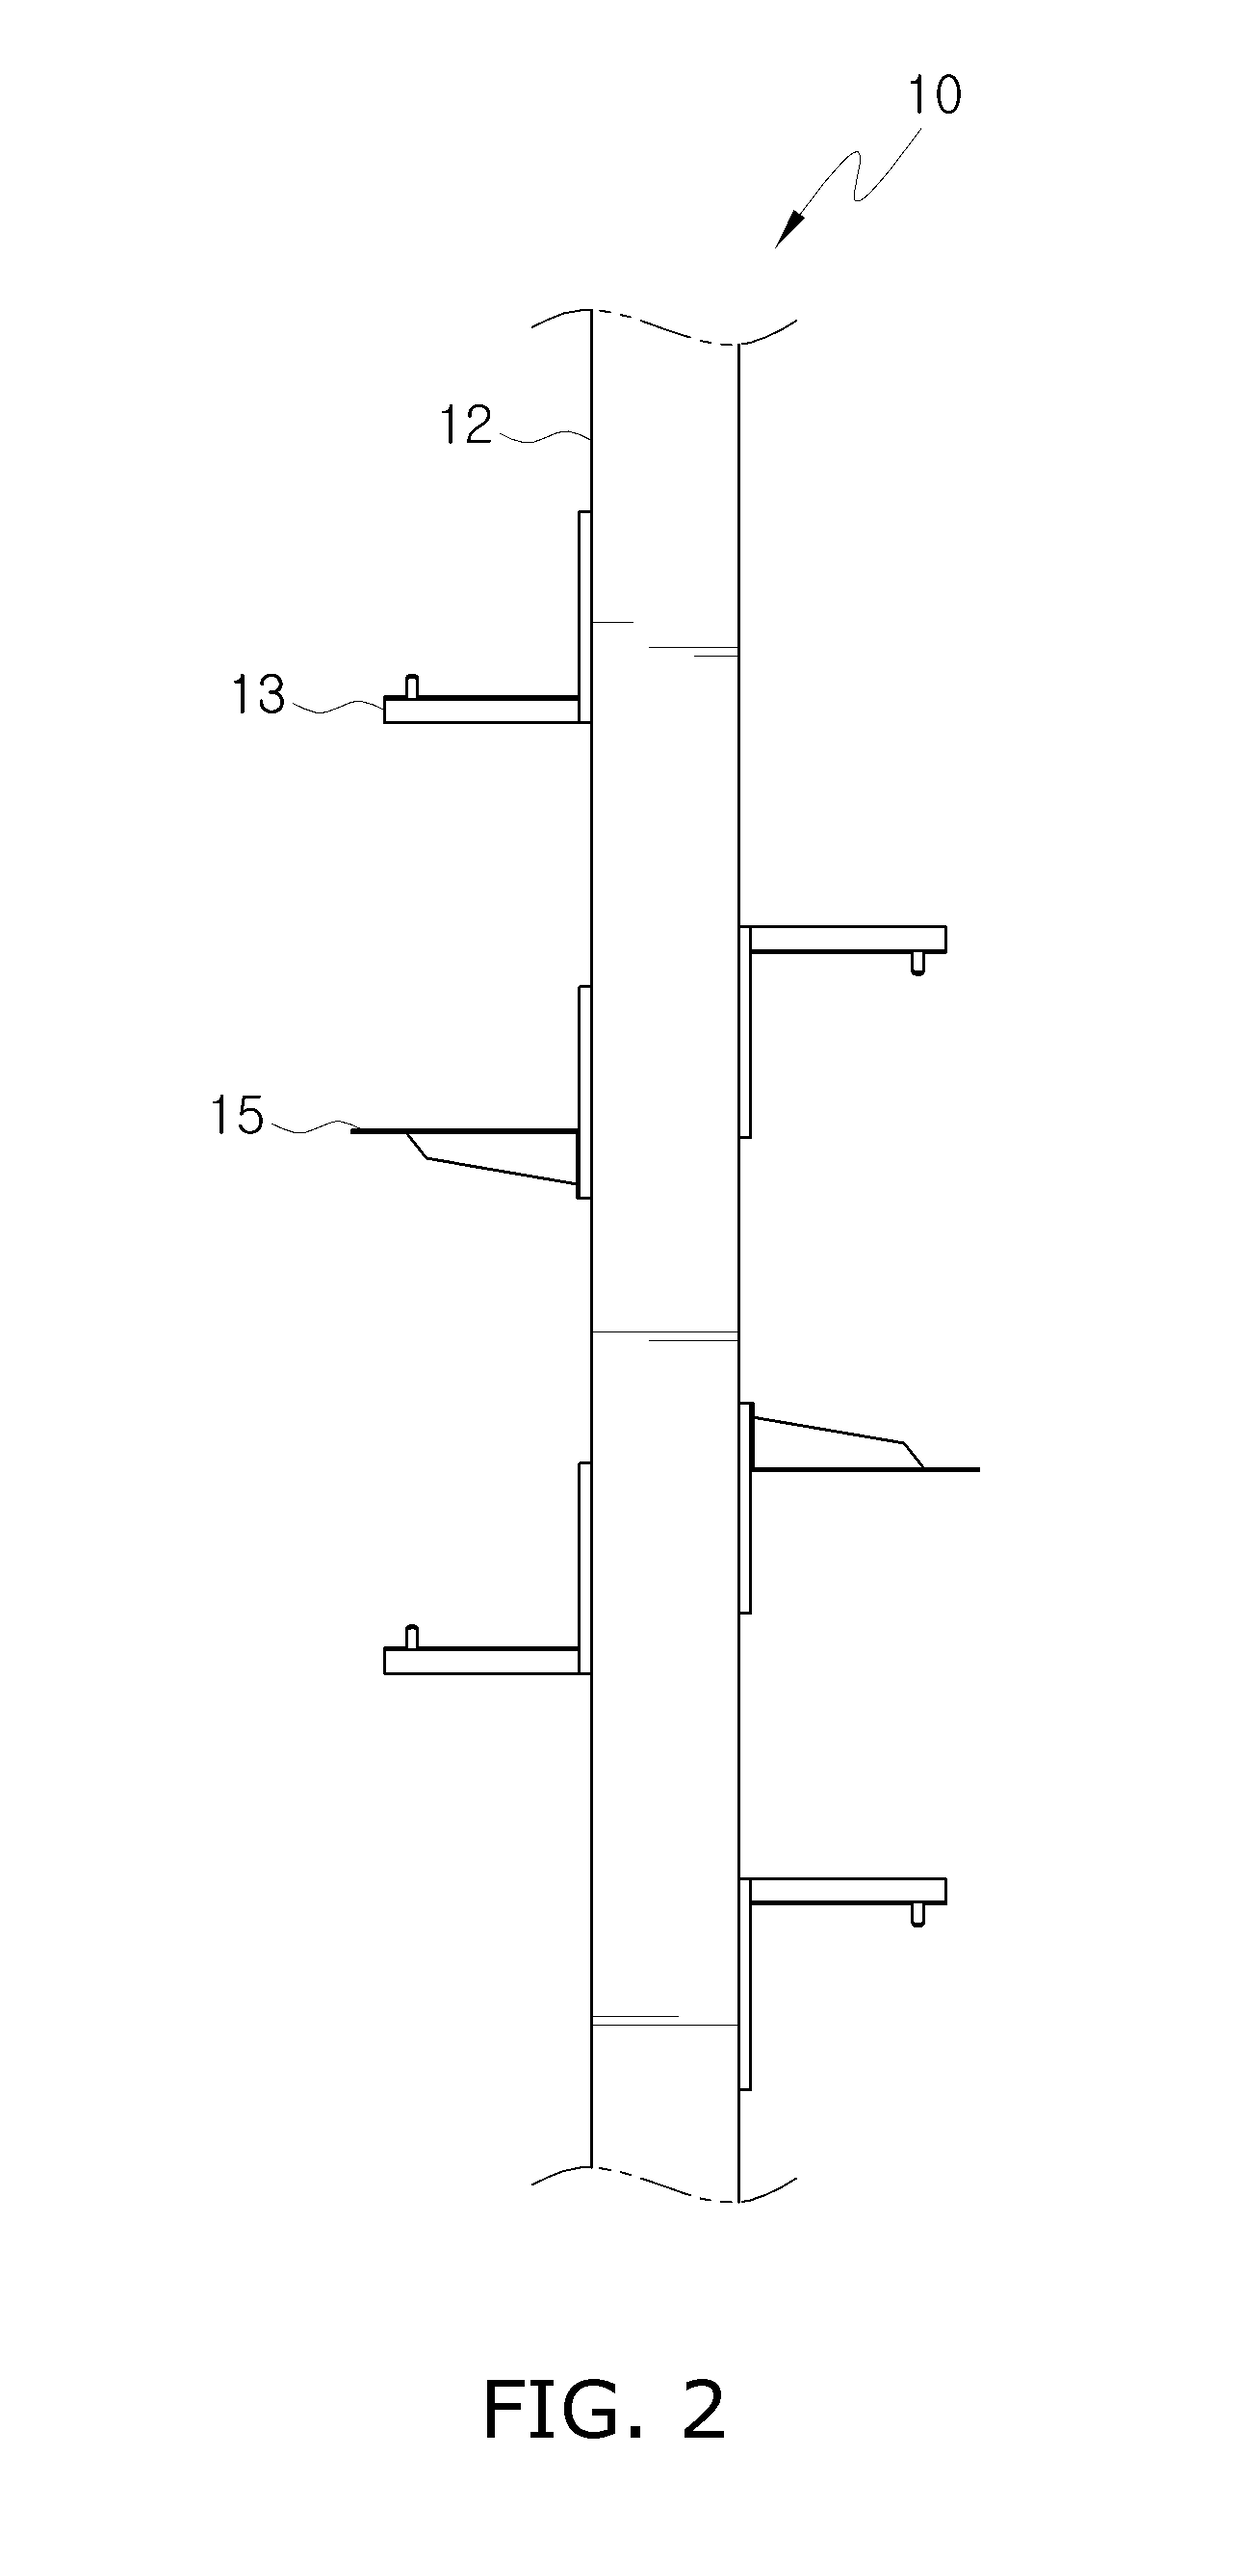 Ball feeding system including ball delivery device and ball feeding device, and ball delivery control method